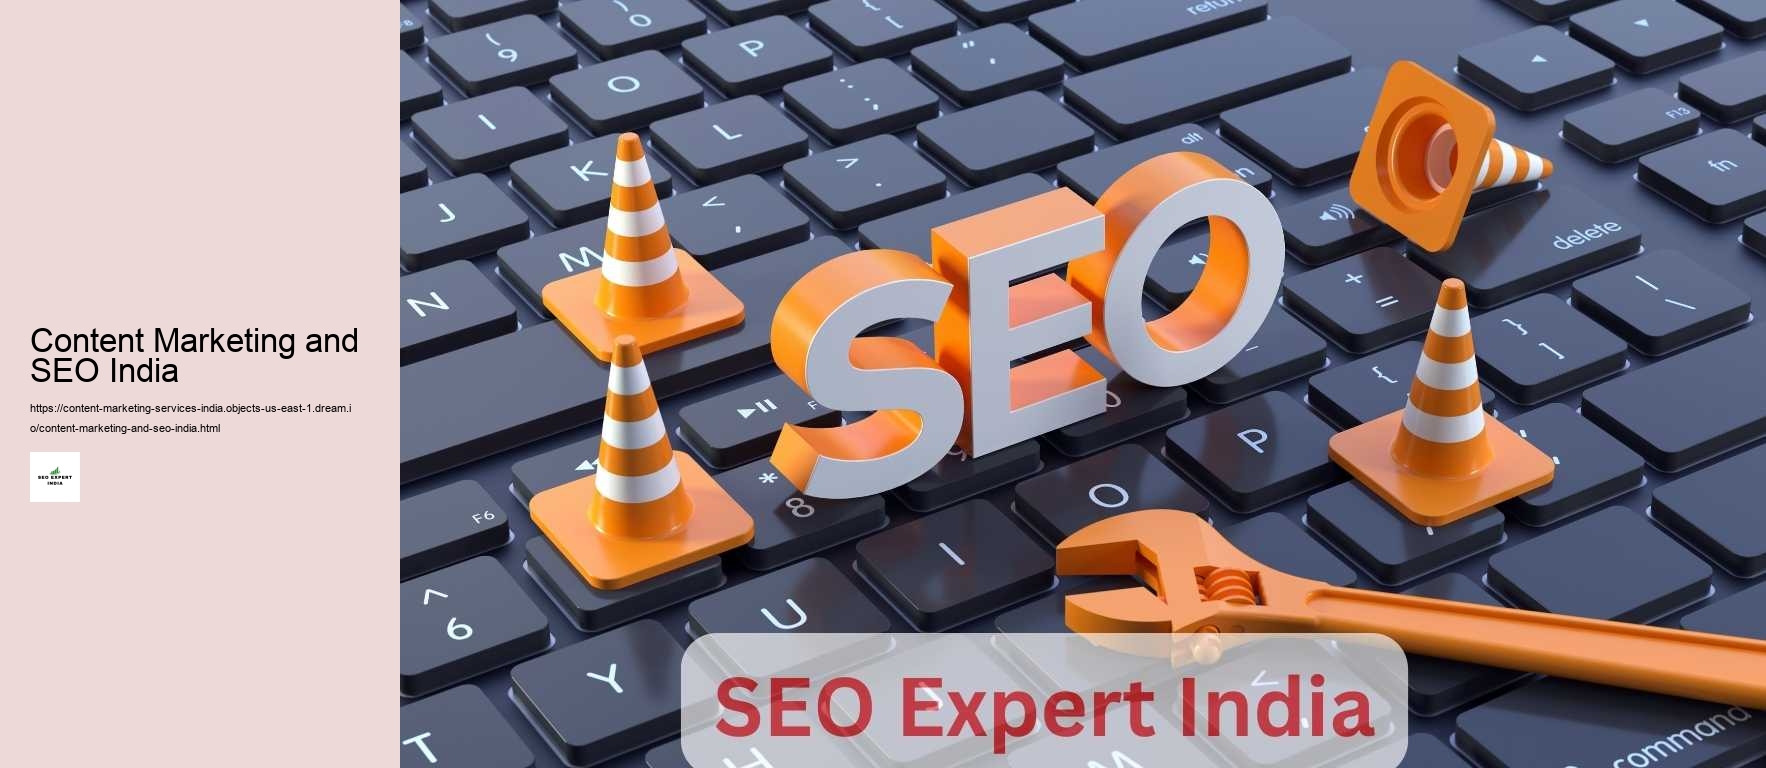 Content Marketing and SEO India